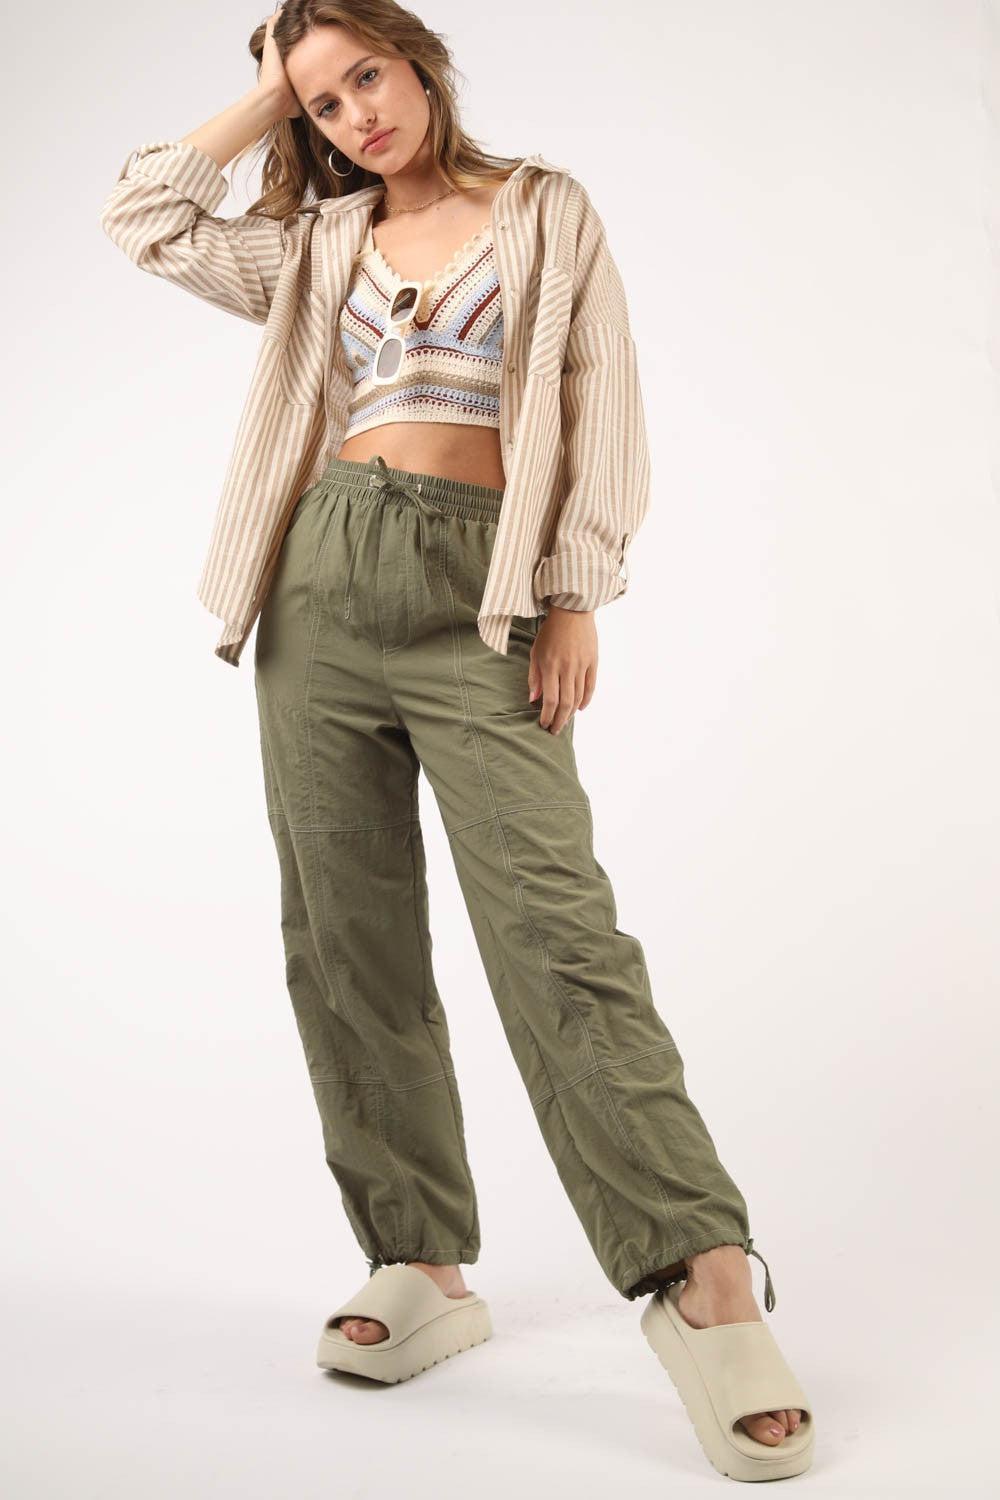 a woman is posing for a picture wearing green pants